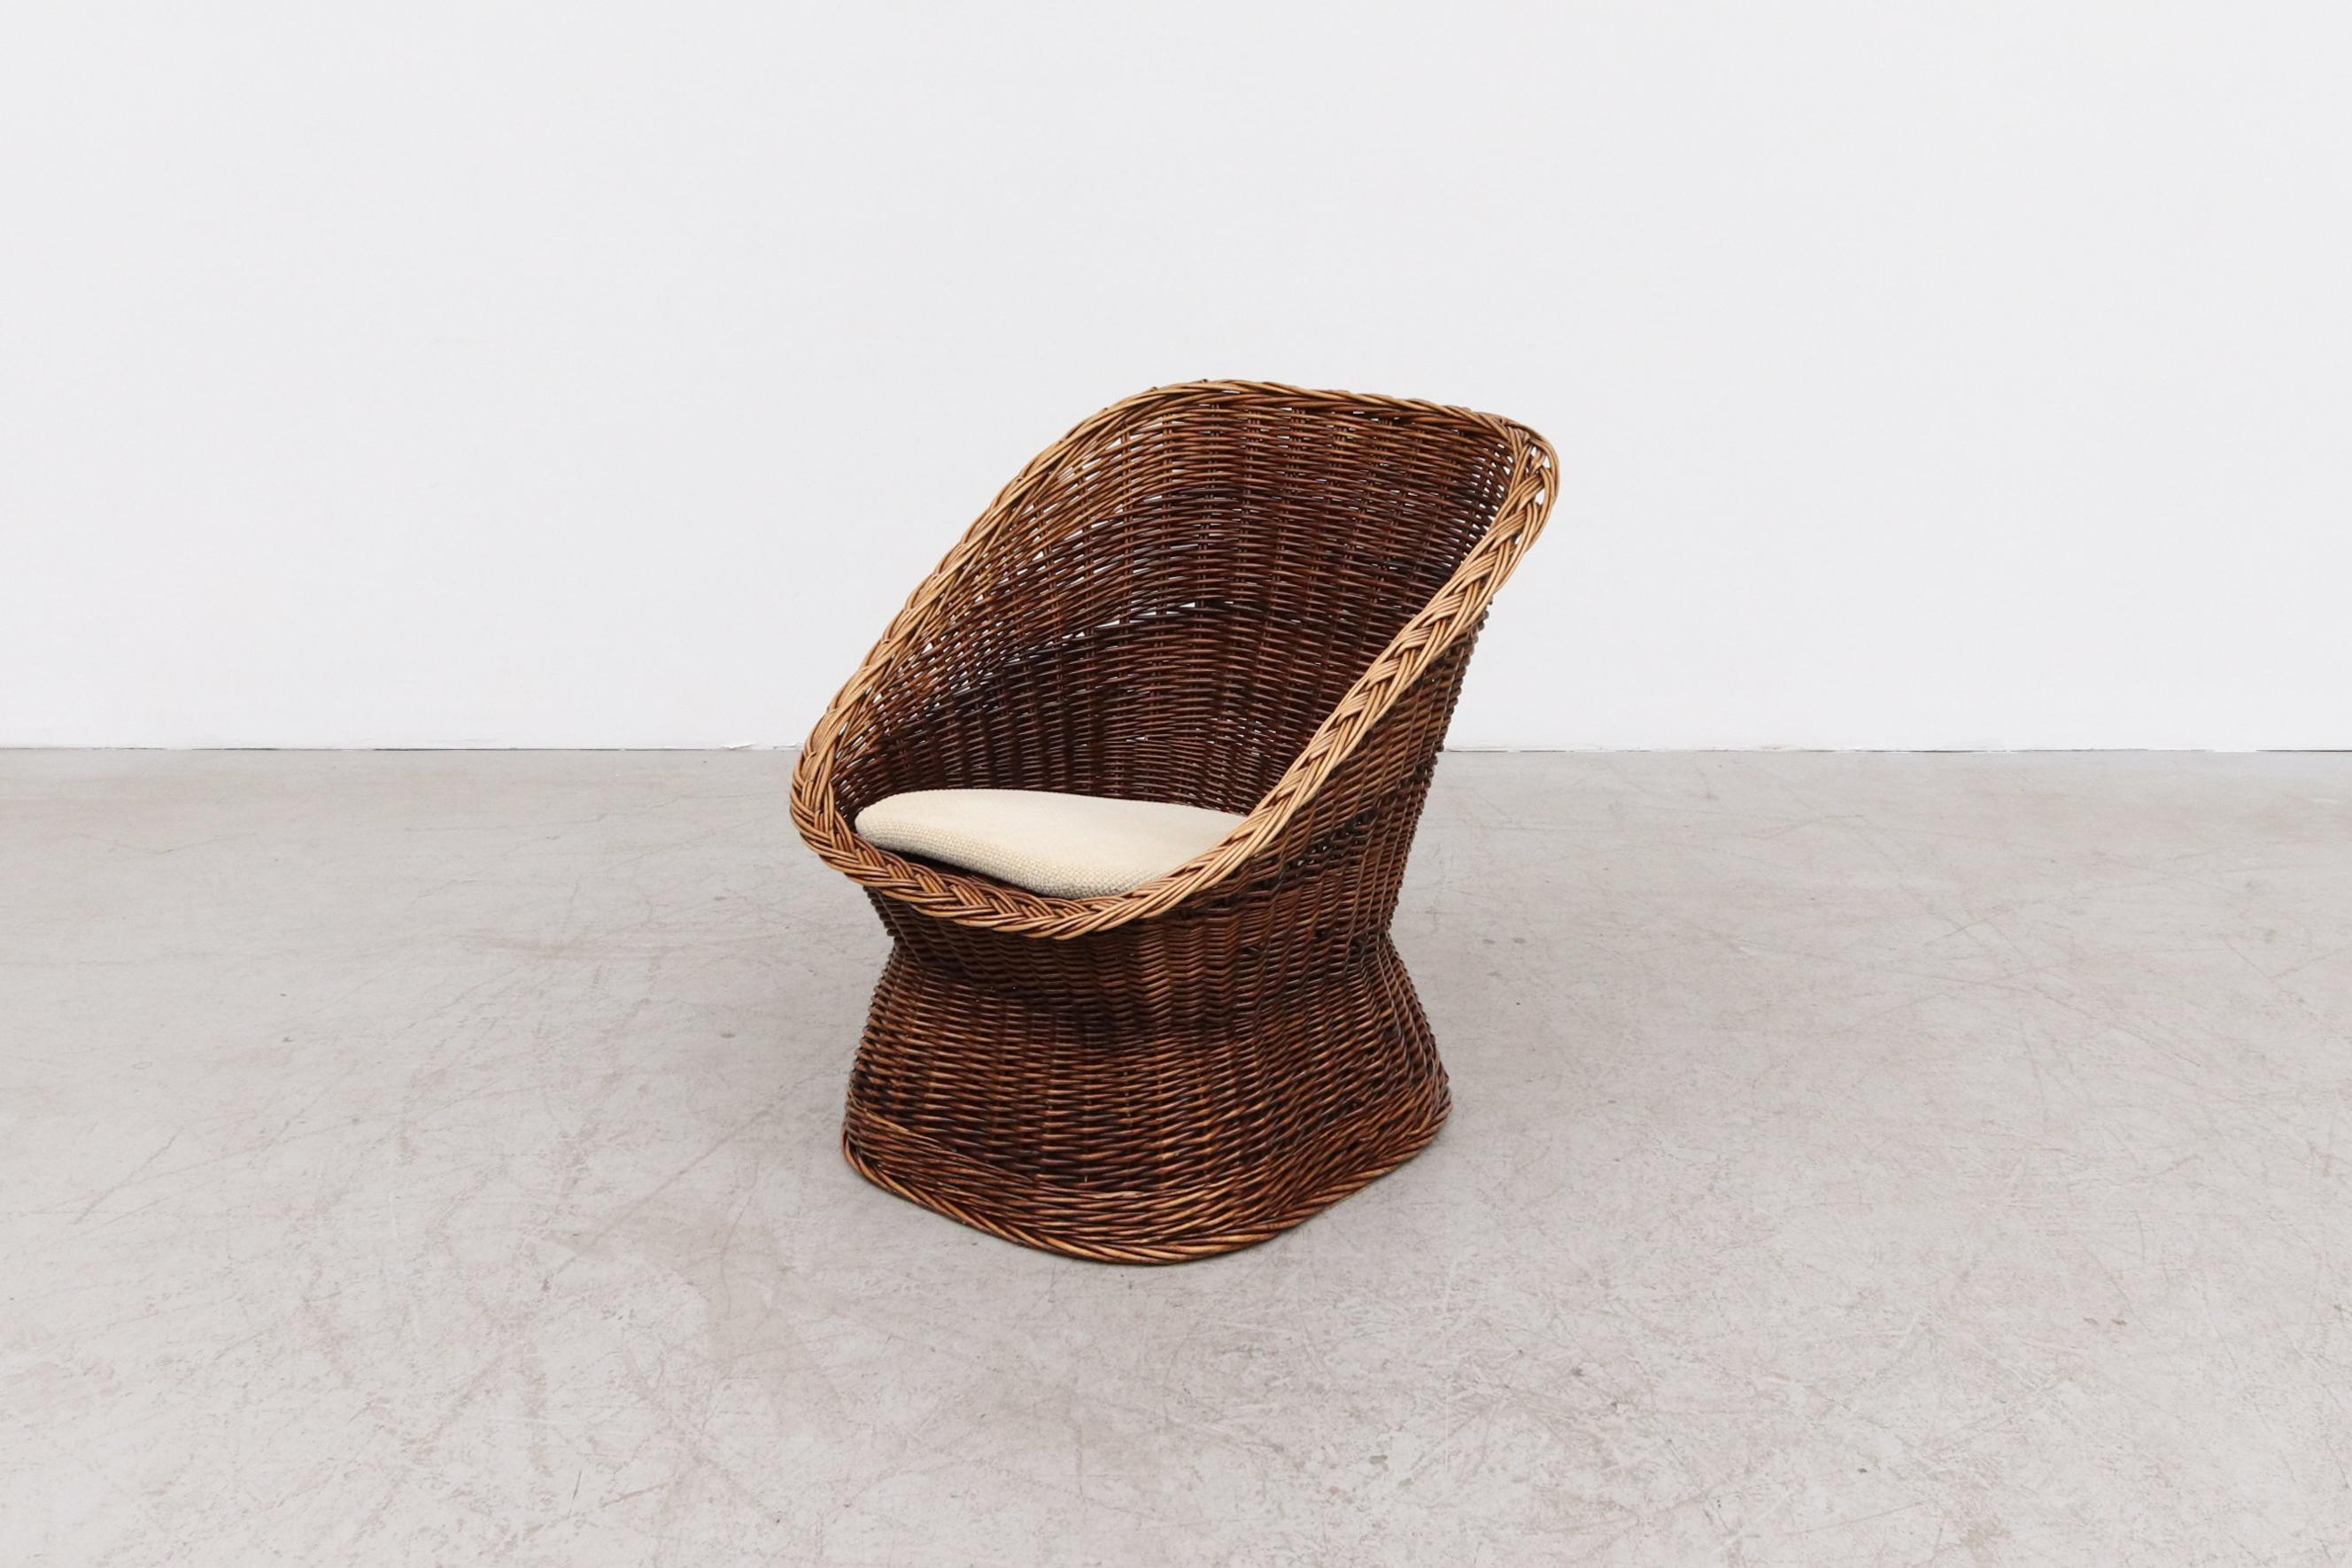 1970s Rattan Bucket Chair w/ Canvas Cushion, Square Shaped Body & Pedestal Base  For Sale 1